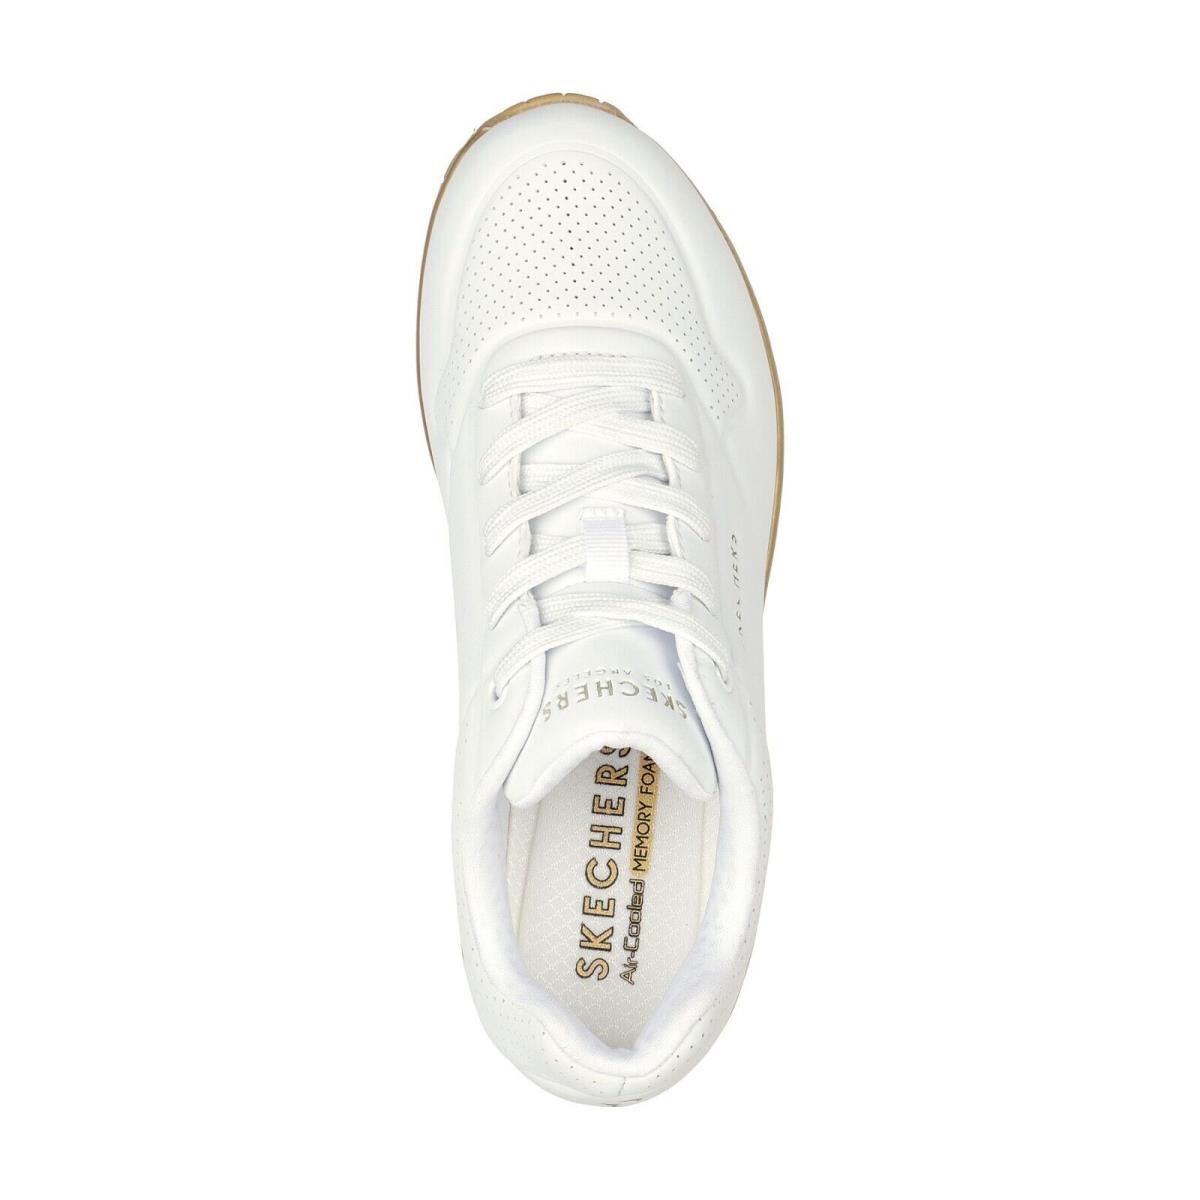 Skechers shoes Uno Gold Soul - White/Gold 7